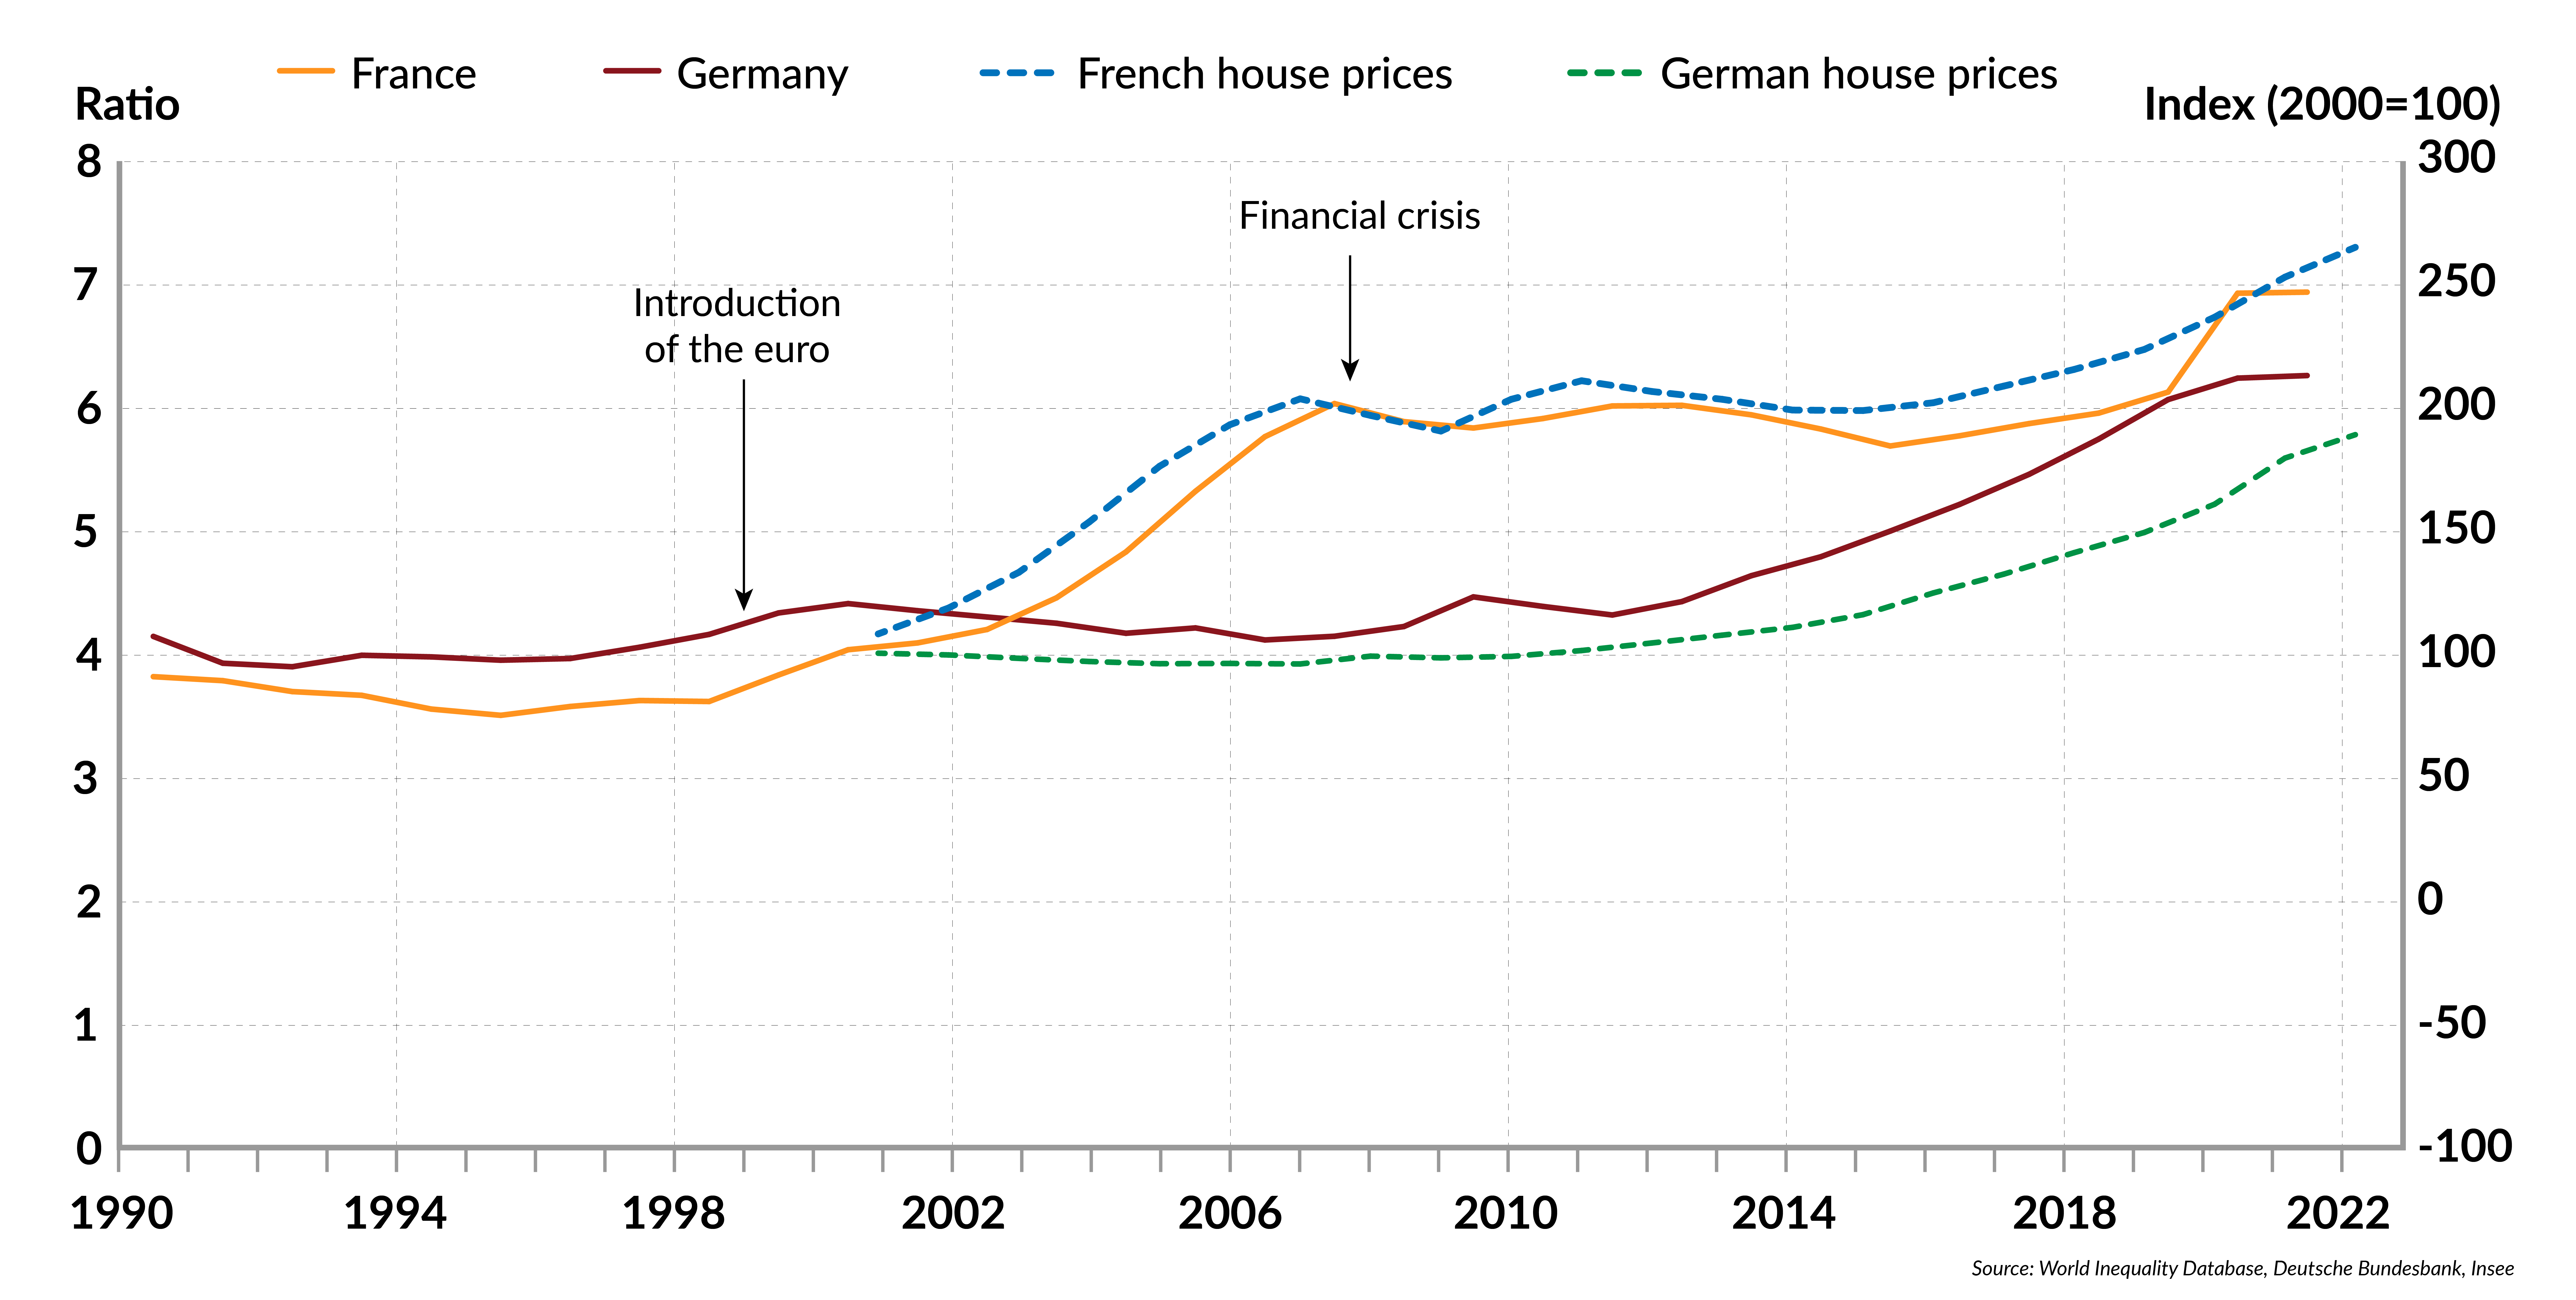 Net-wealth to net-income ratio and housing prices in Germany and France
